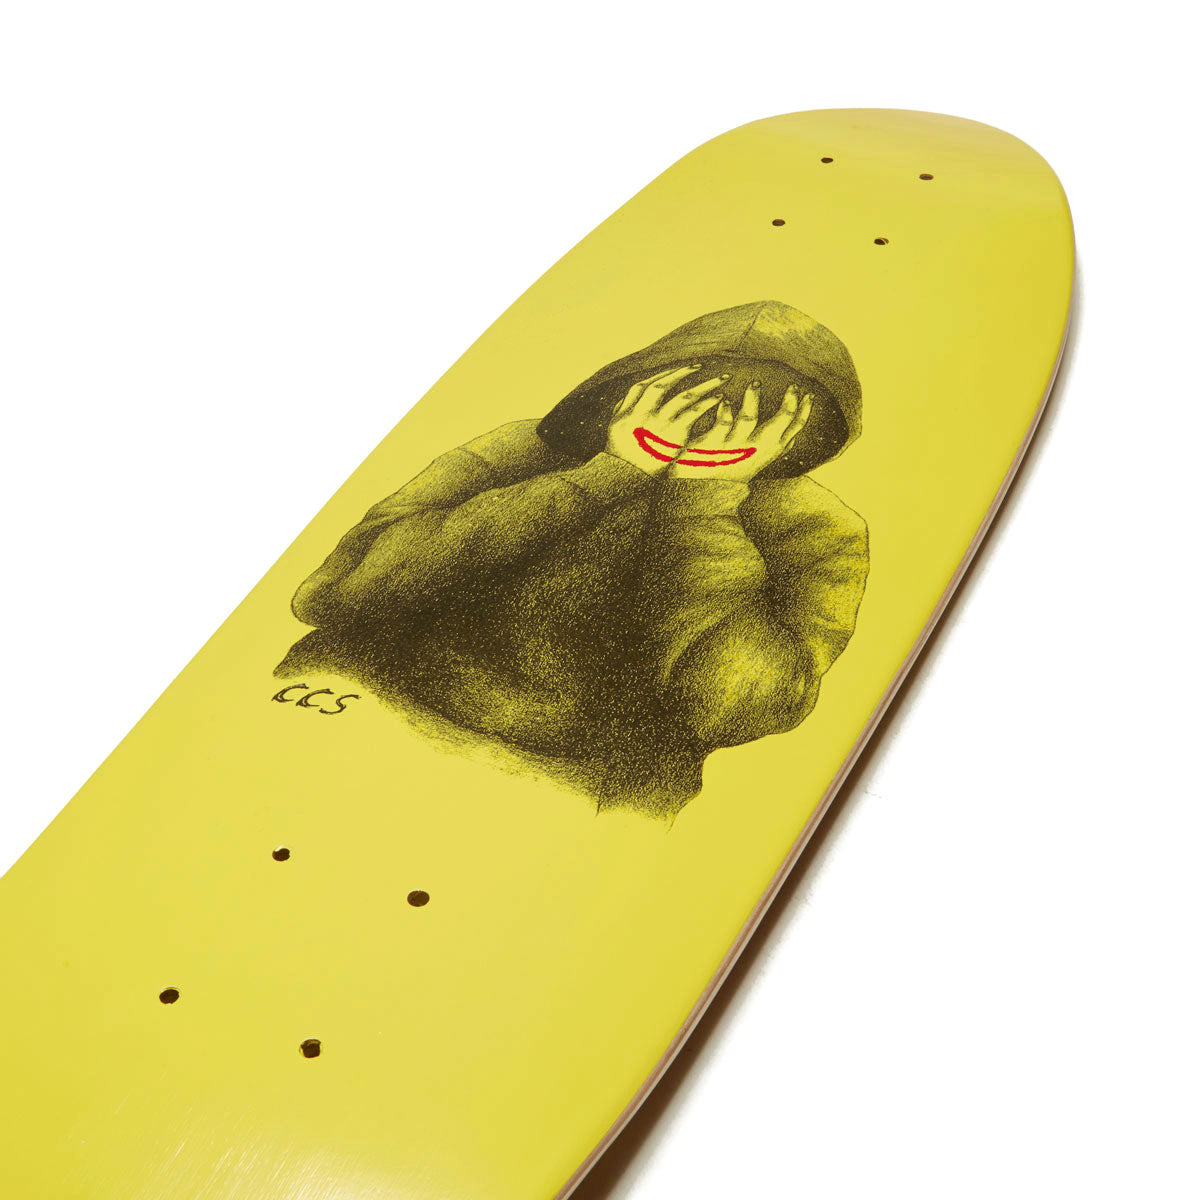 CCS Smile on The Surface Crusier Skateboard Complete - Yellow image 3